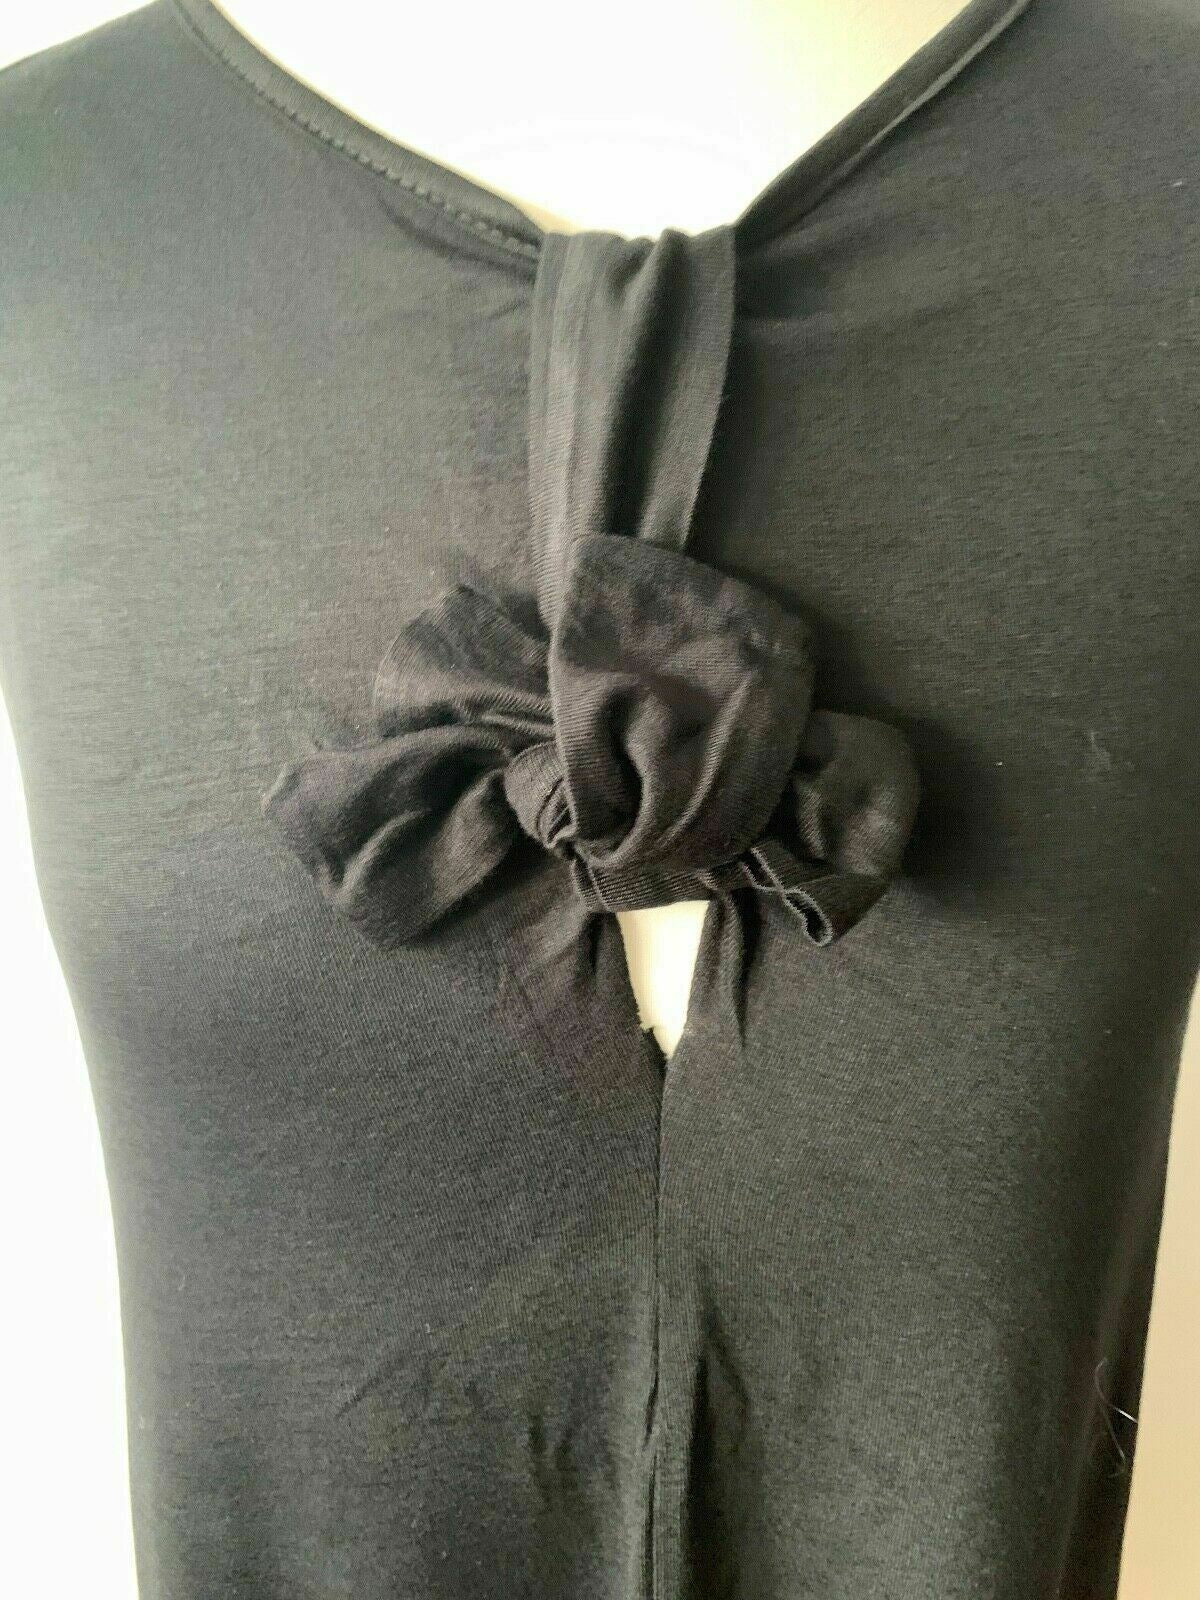 Be Jealous Black Sleeveless Top Front Tie Knot Baggy Shift Size S / M